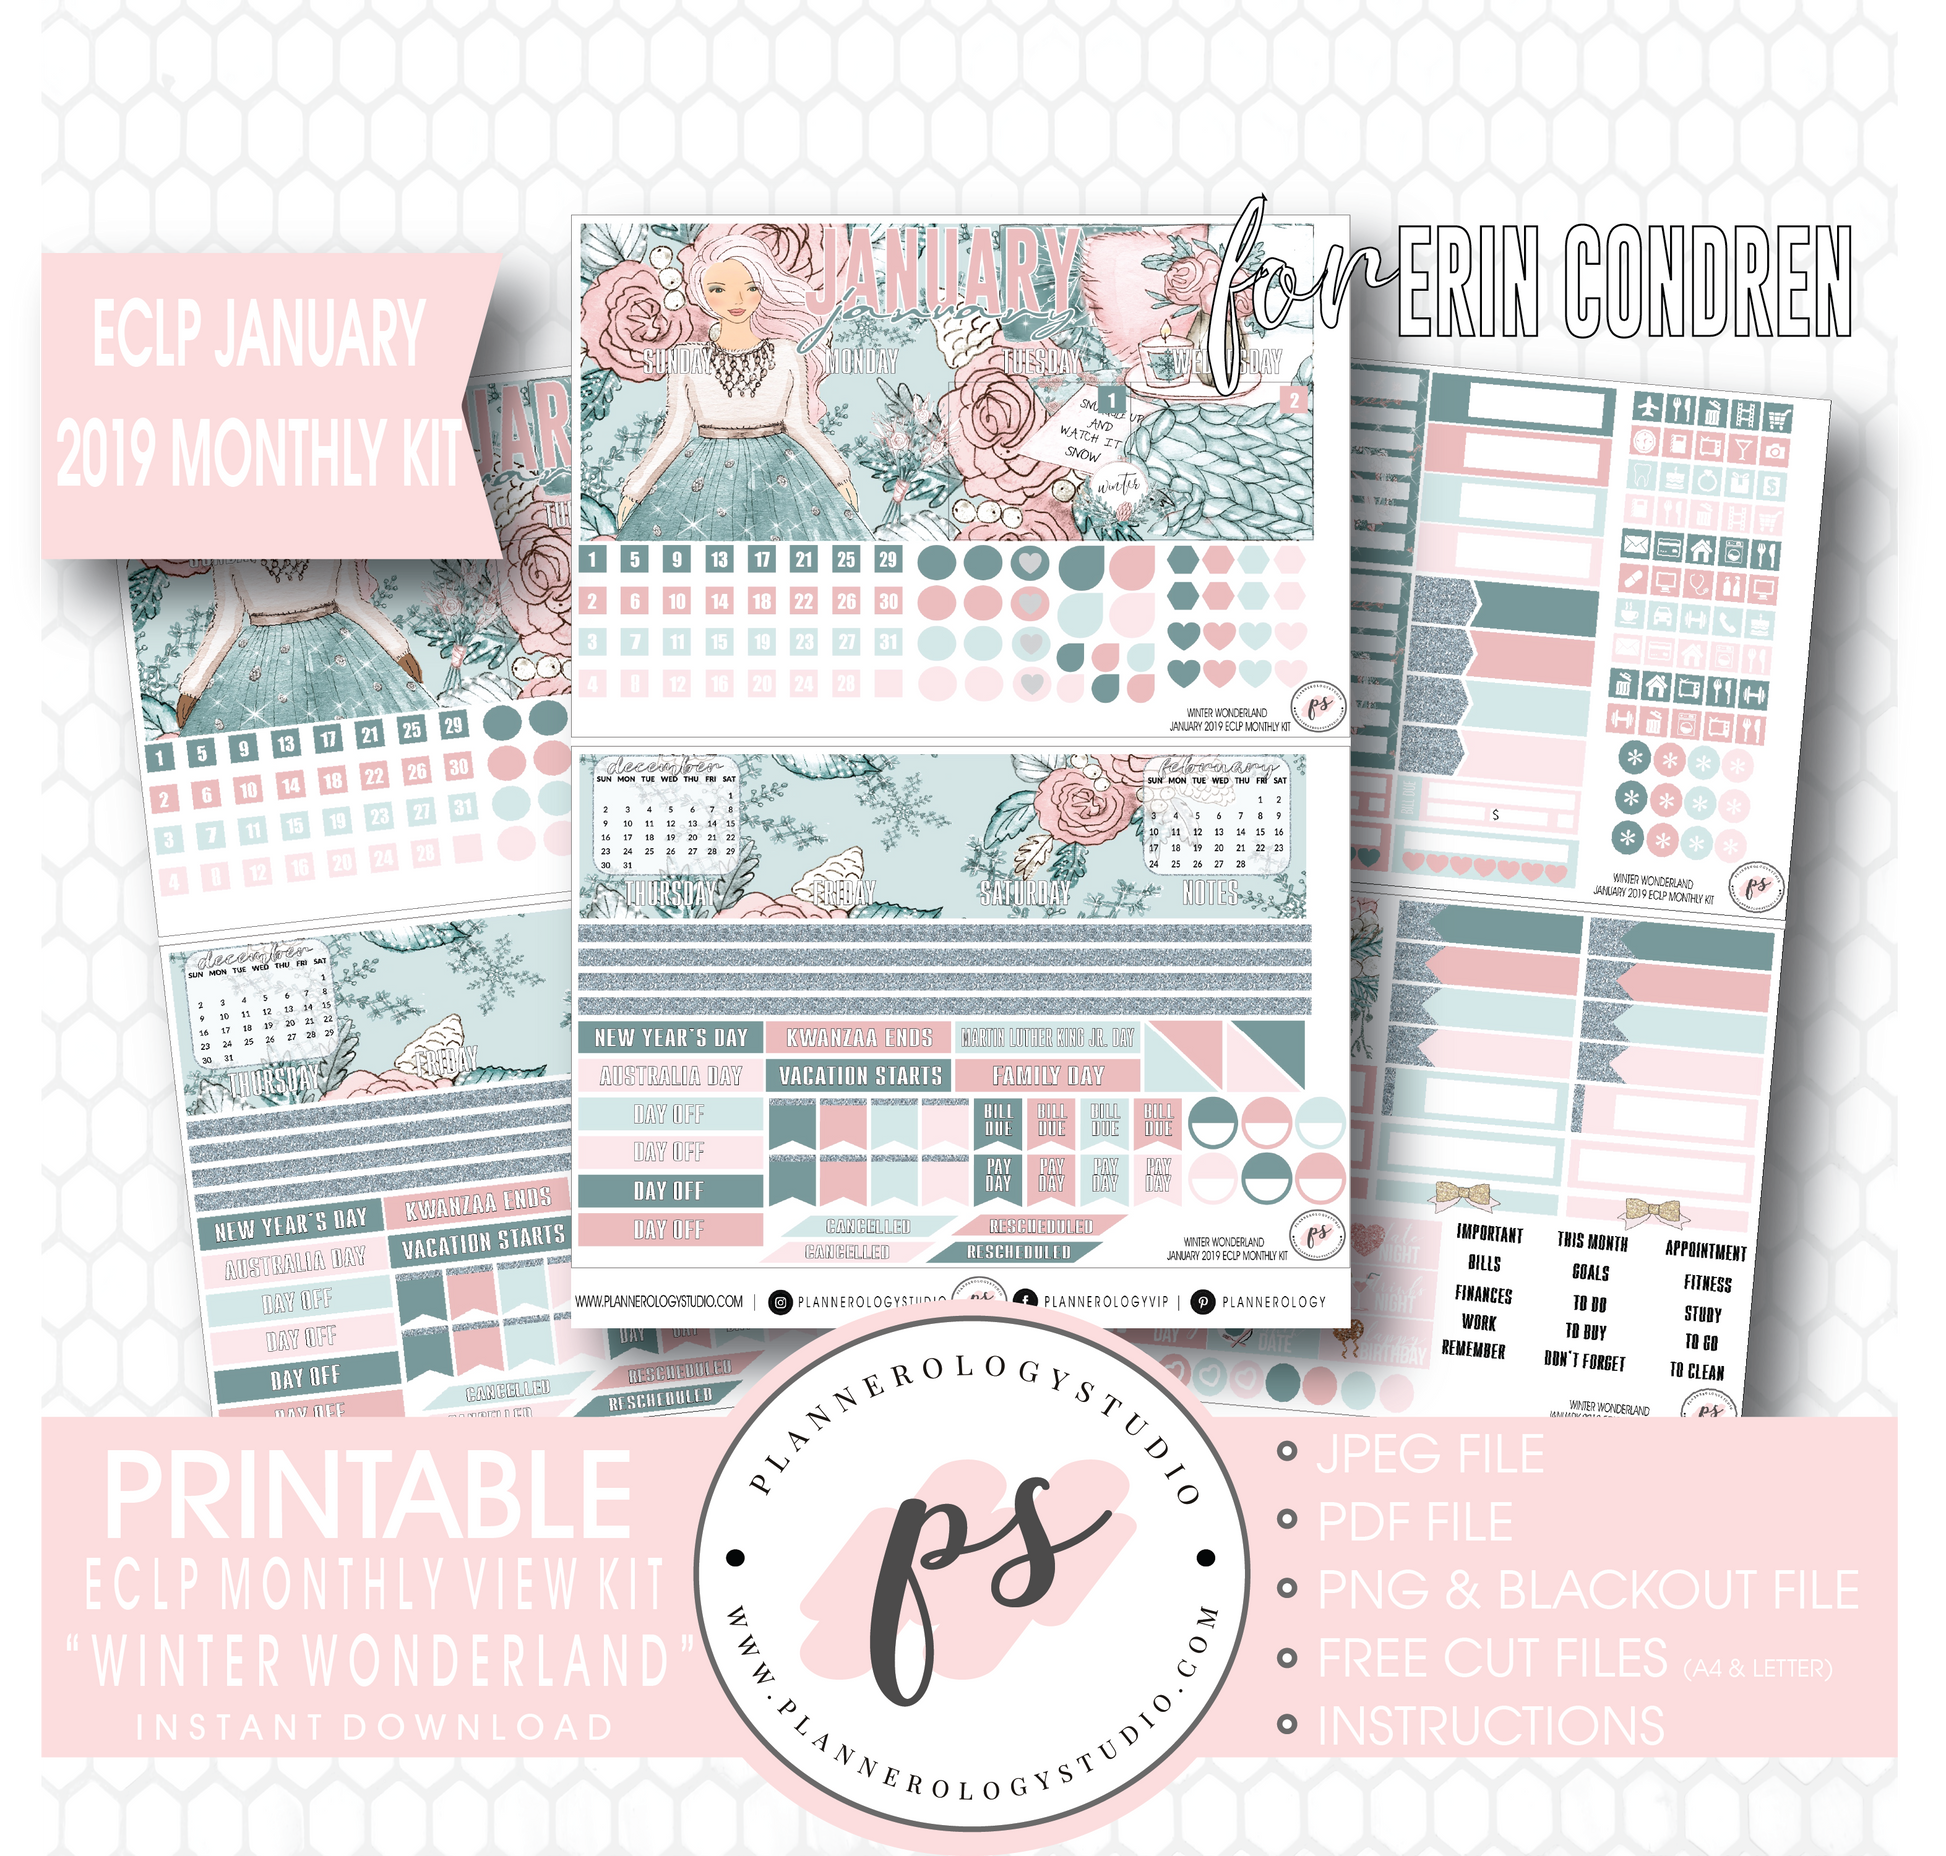 Winter Wonderland January 2019 Monthly View Kit Digital Printable Planner Stickers (for use with Erin Condren) - Plannerologystudio